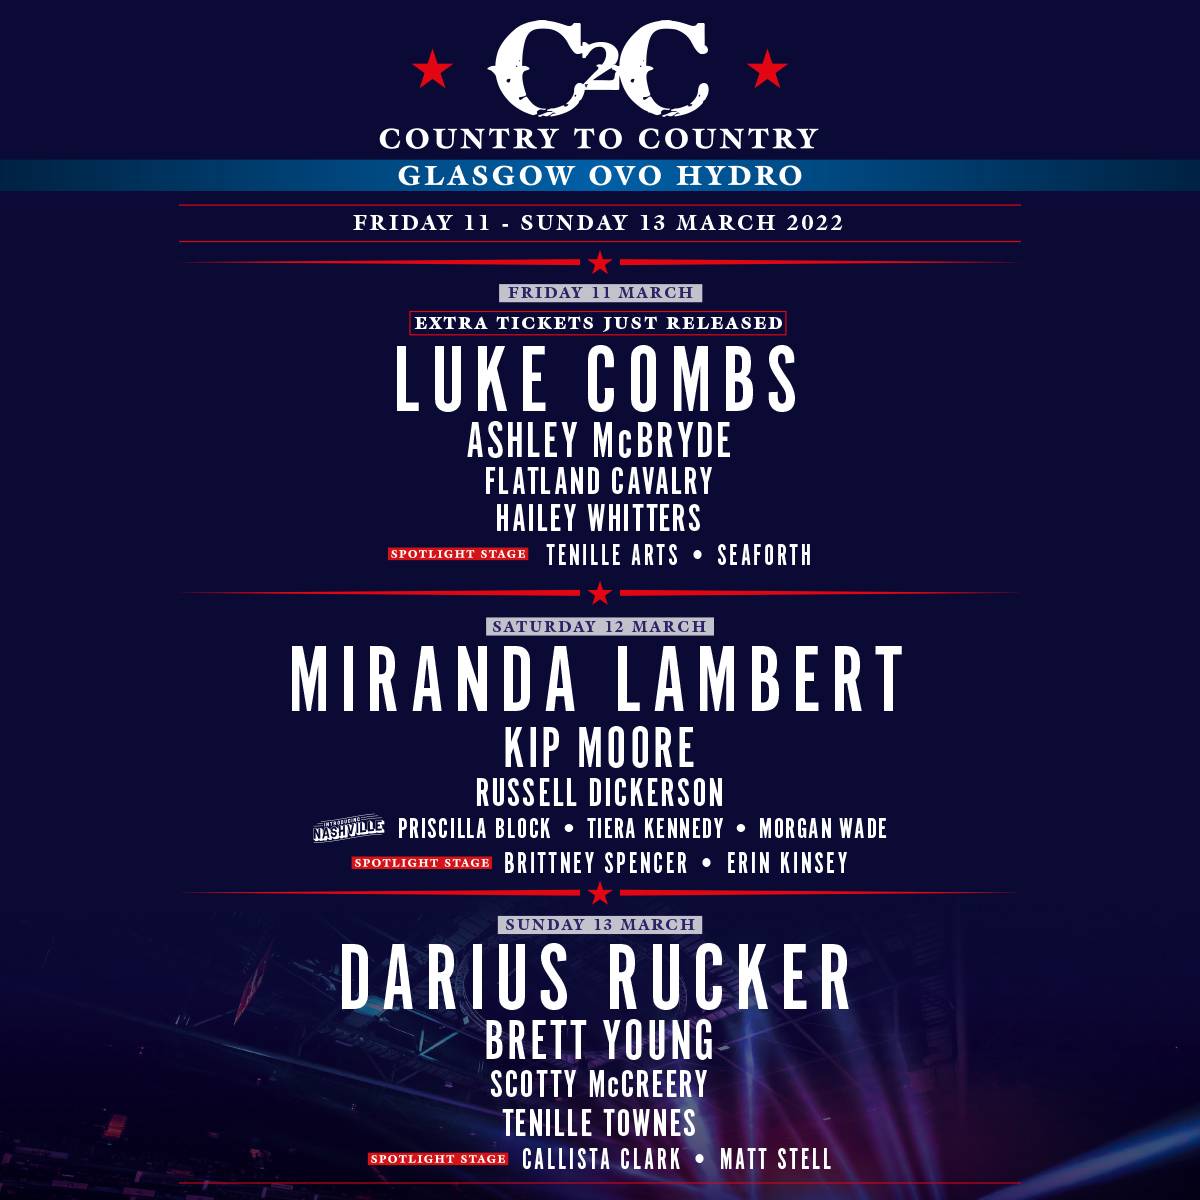 THE WAIT IS ALMOST OVER for C2C Glasgow! Extra tickets have just been released for Friday and we've also added @weareseaforth and @MattStellMusic to the line-up! TICKETS — gigss.co/C2C